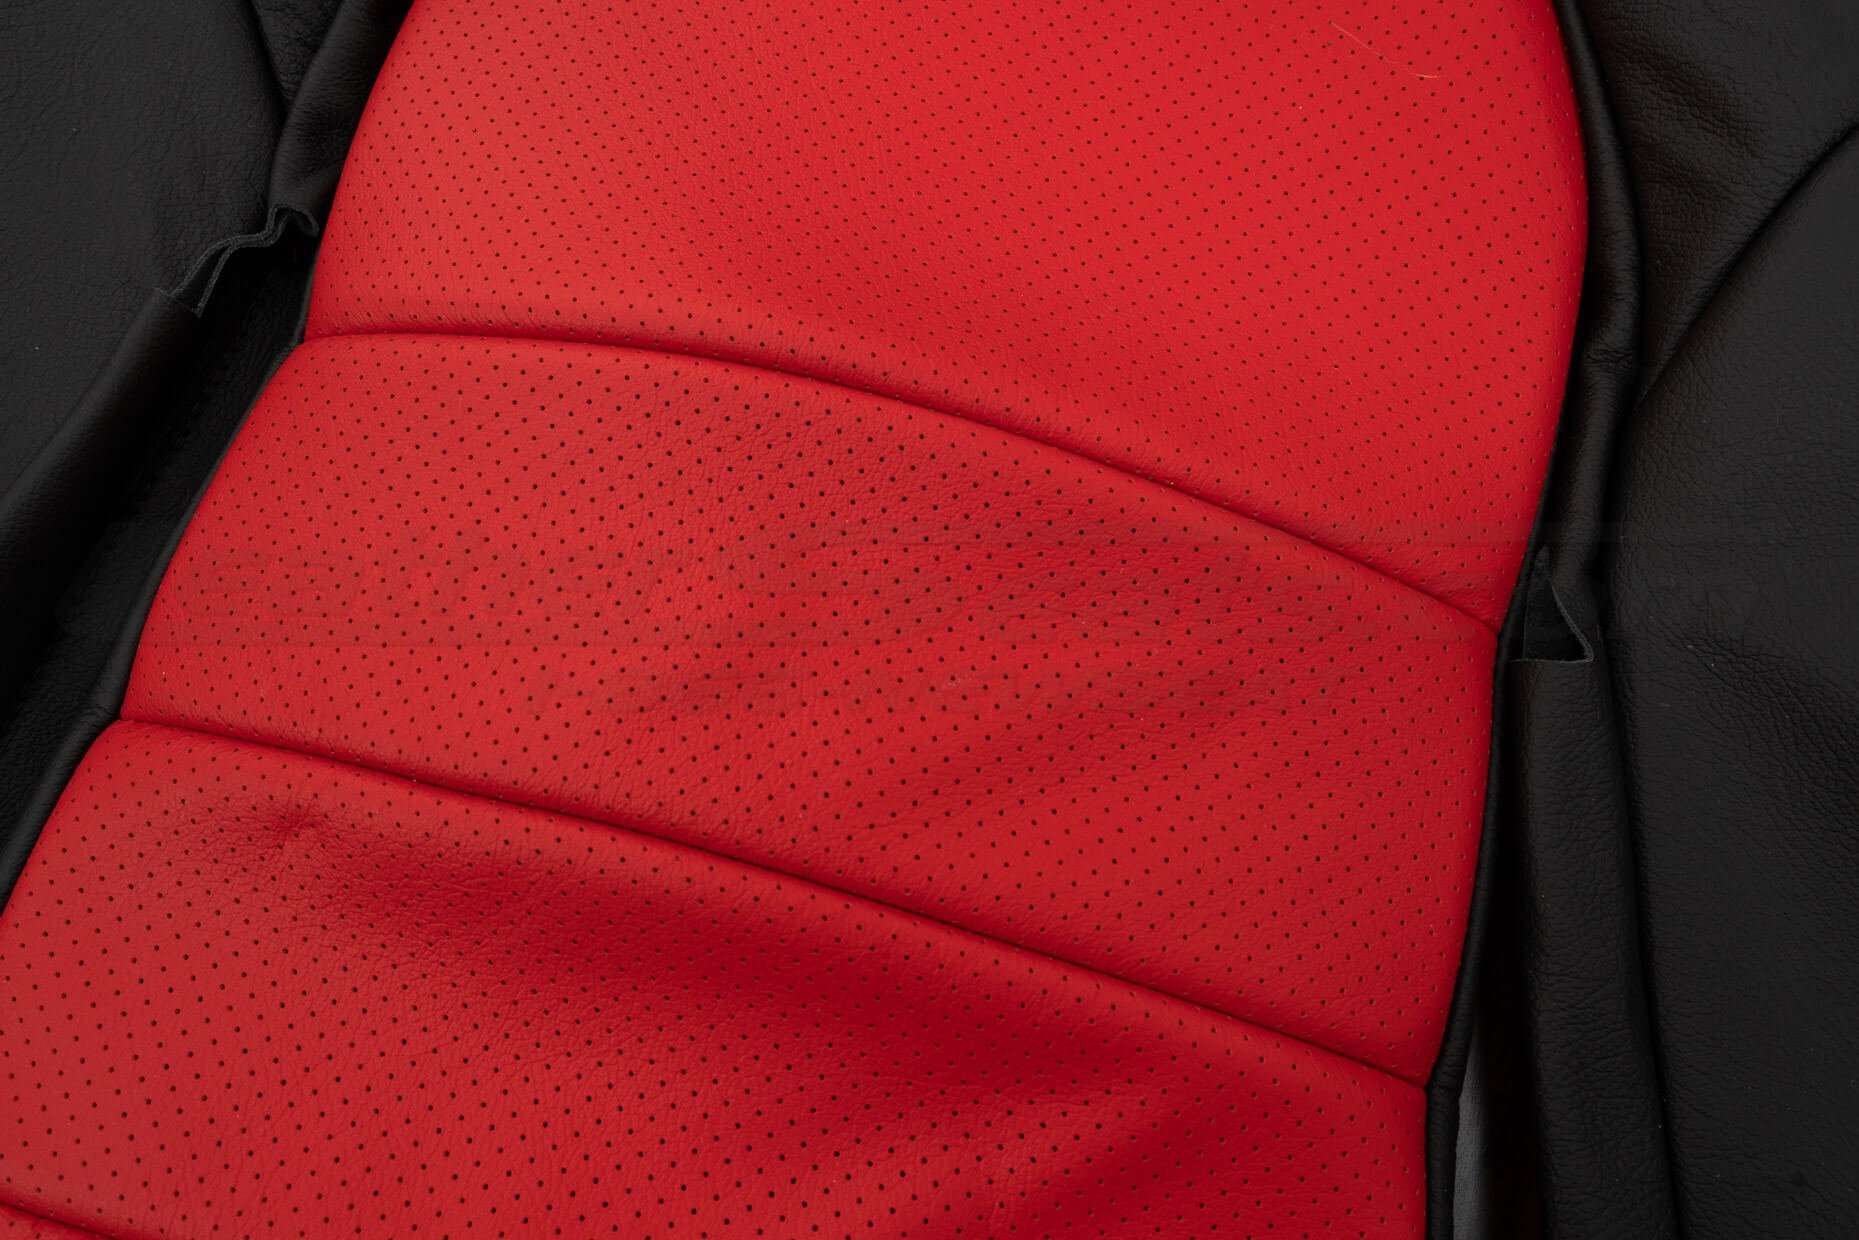 Perforated Bright Red Insert close-up